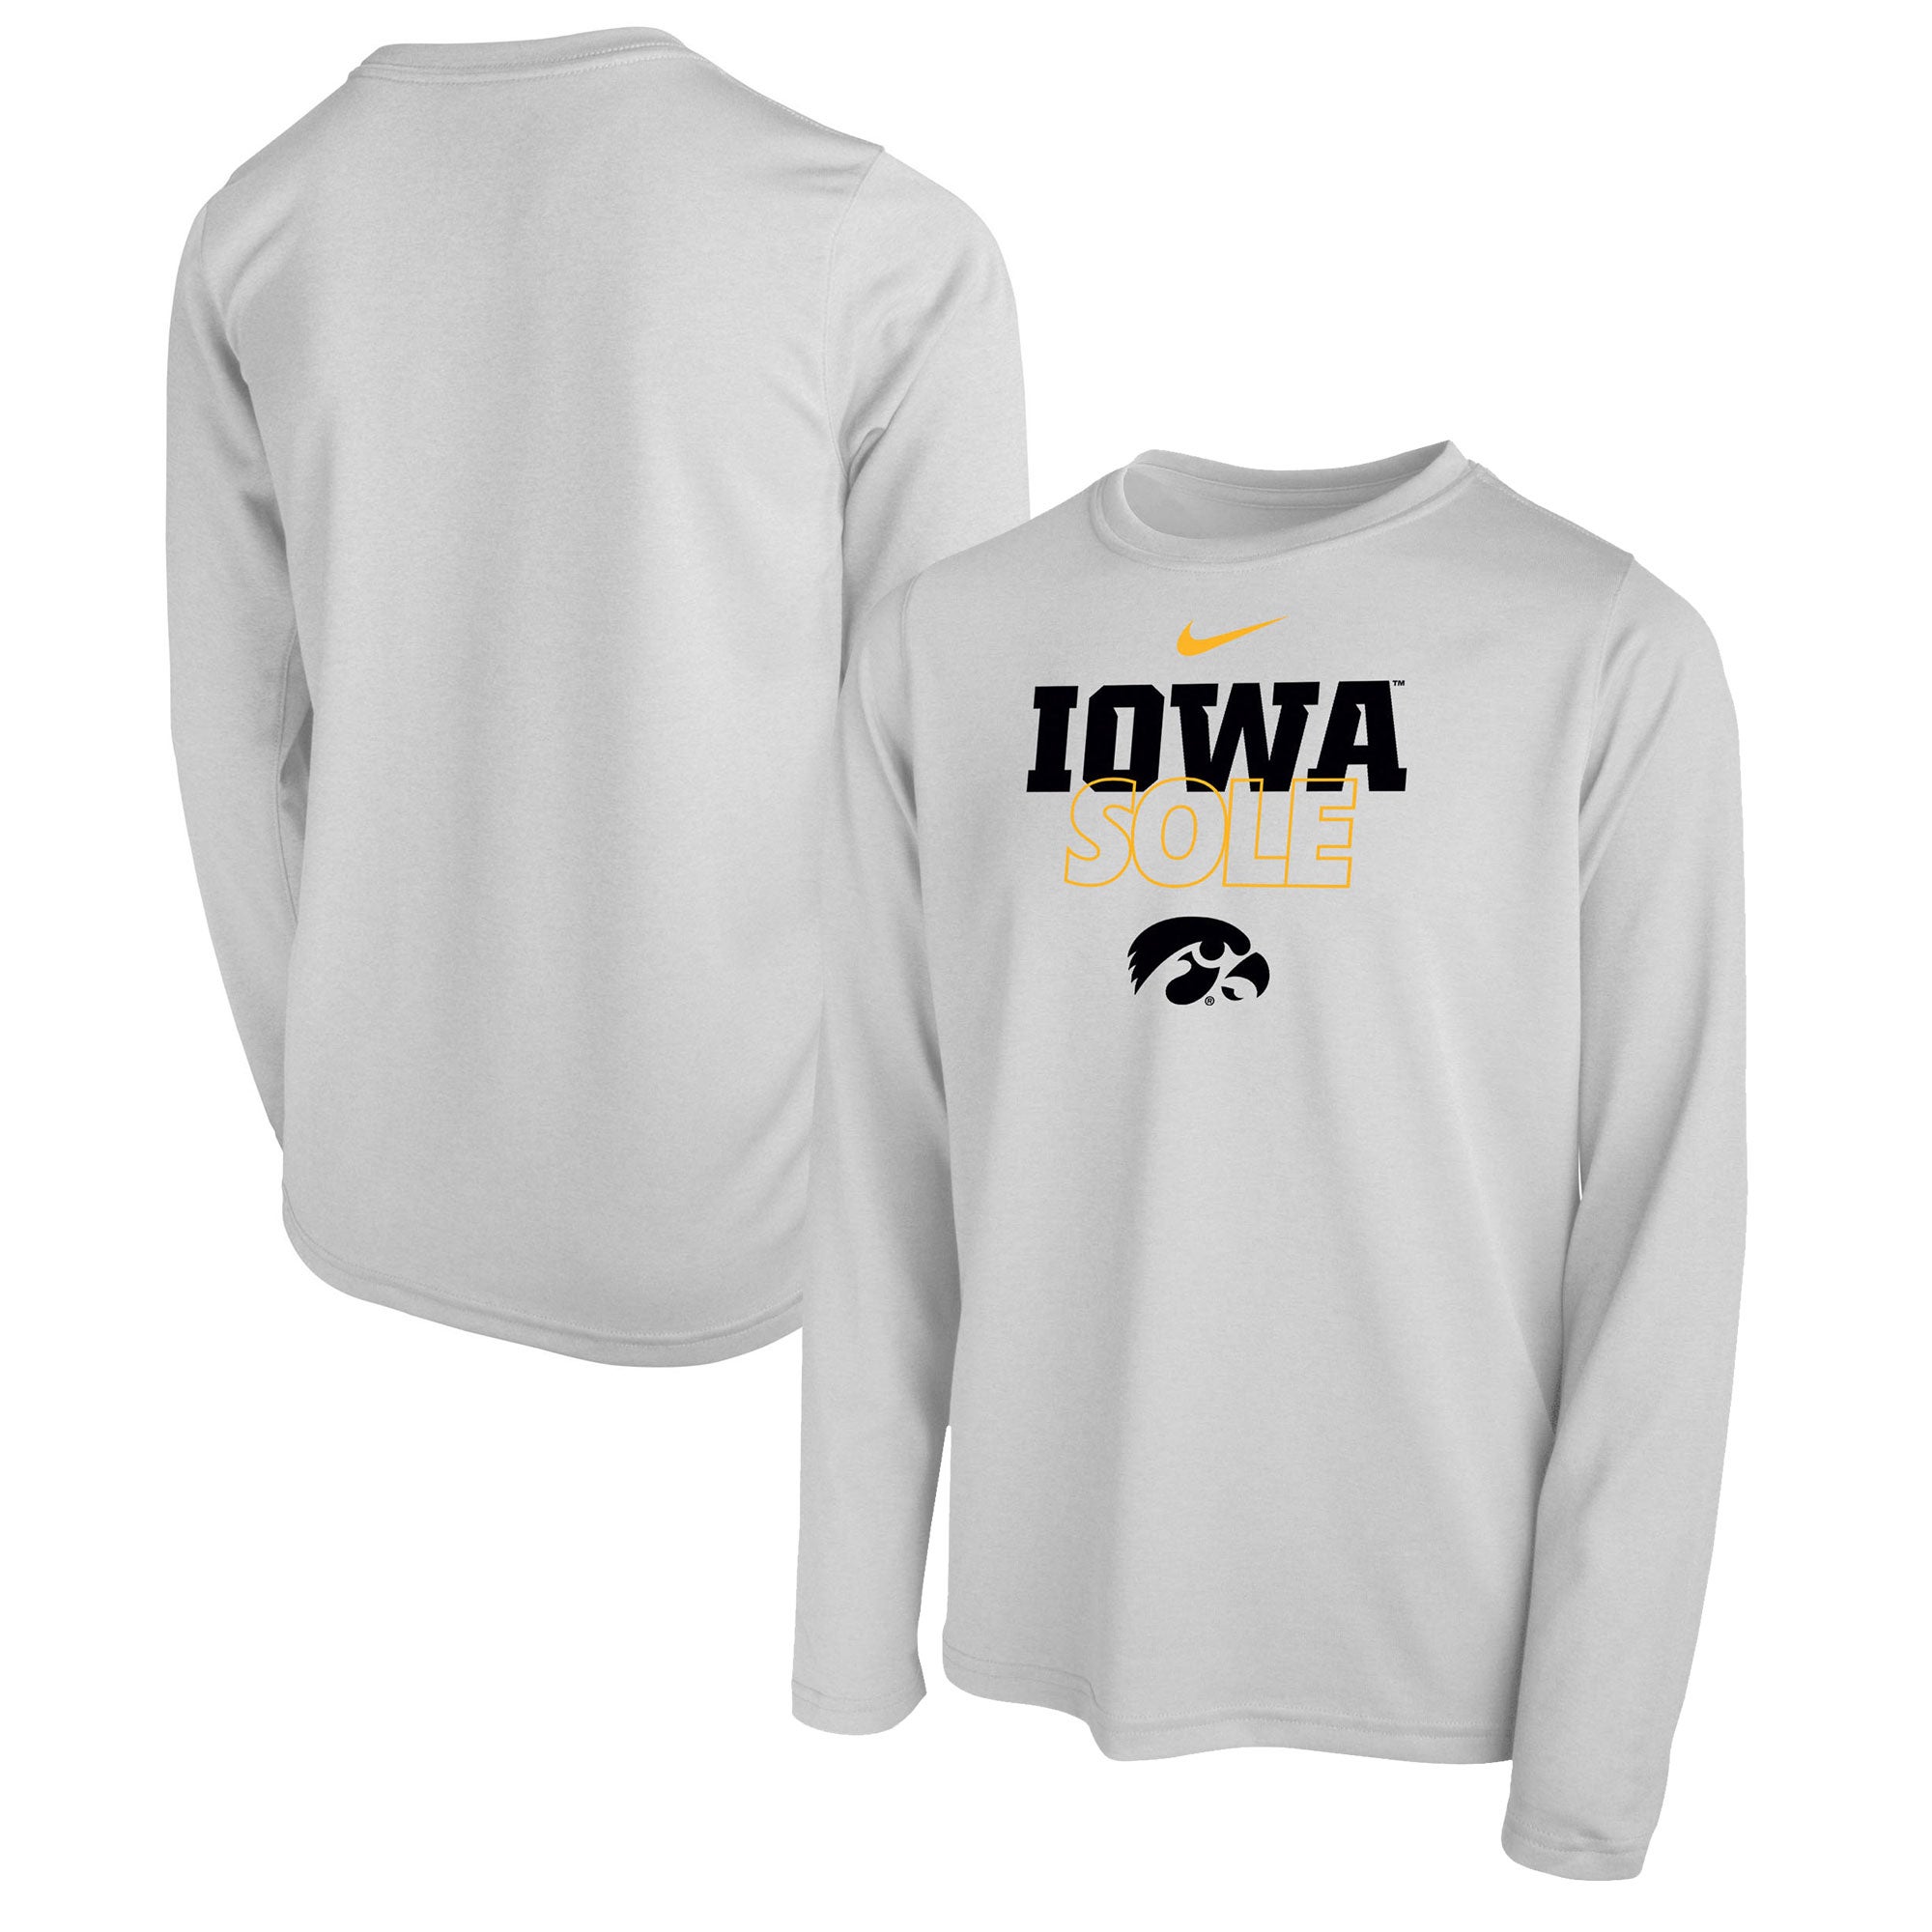 What are these bench shirts from Nike trying to convey? Carolina Sole, Iowa  Sole, Lopes Sole, etc. Does it literally mean “Iowa Only” or is there  something deeper/more obvious that I'm missing? 